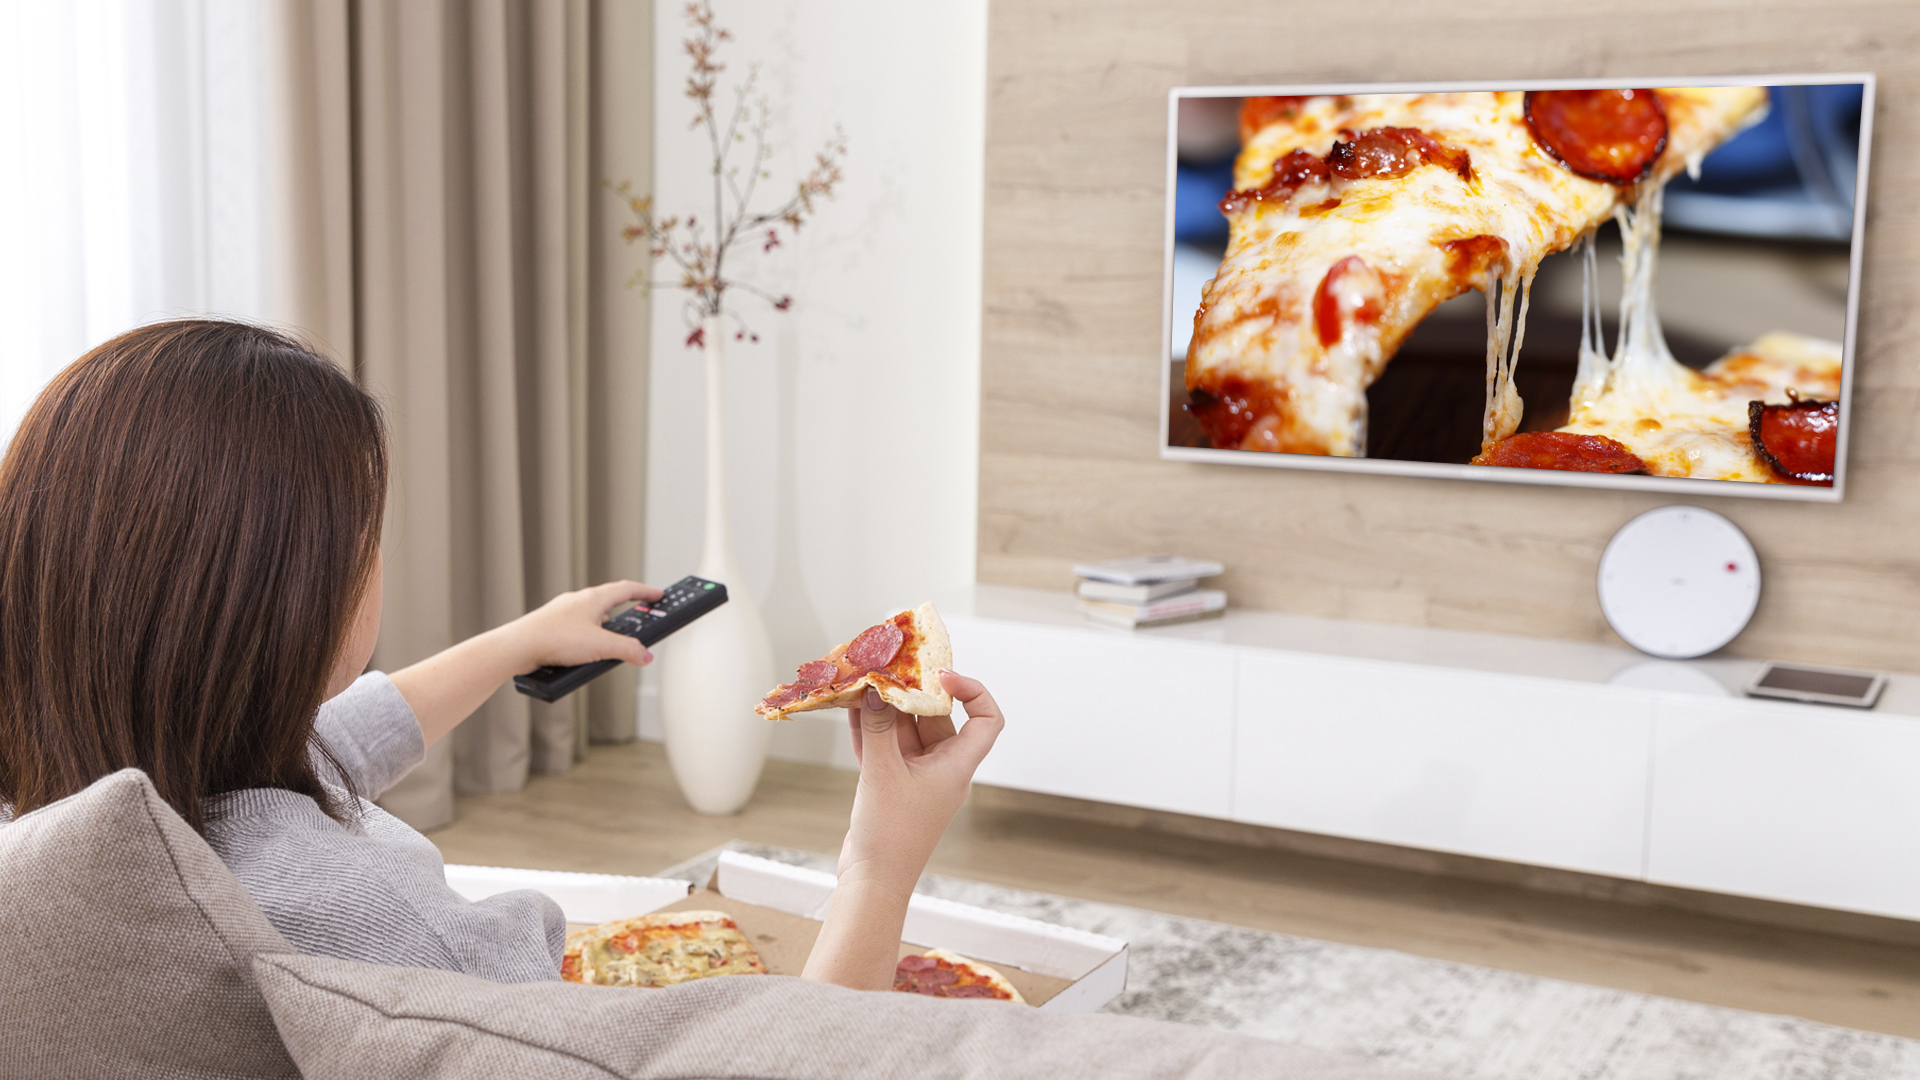 A woman eating a pizza while watching a TV show about pizza